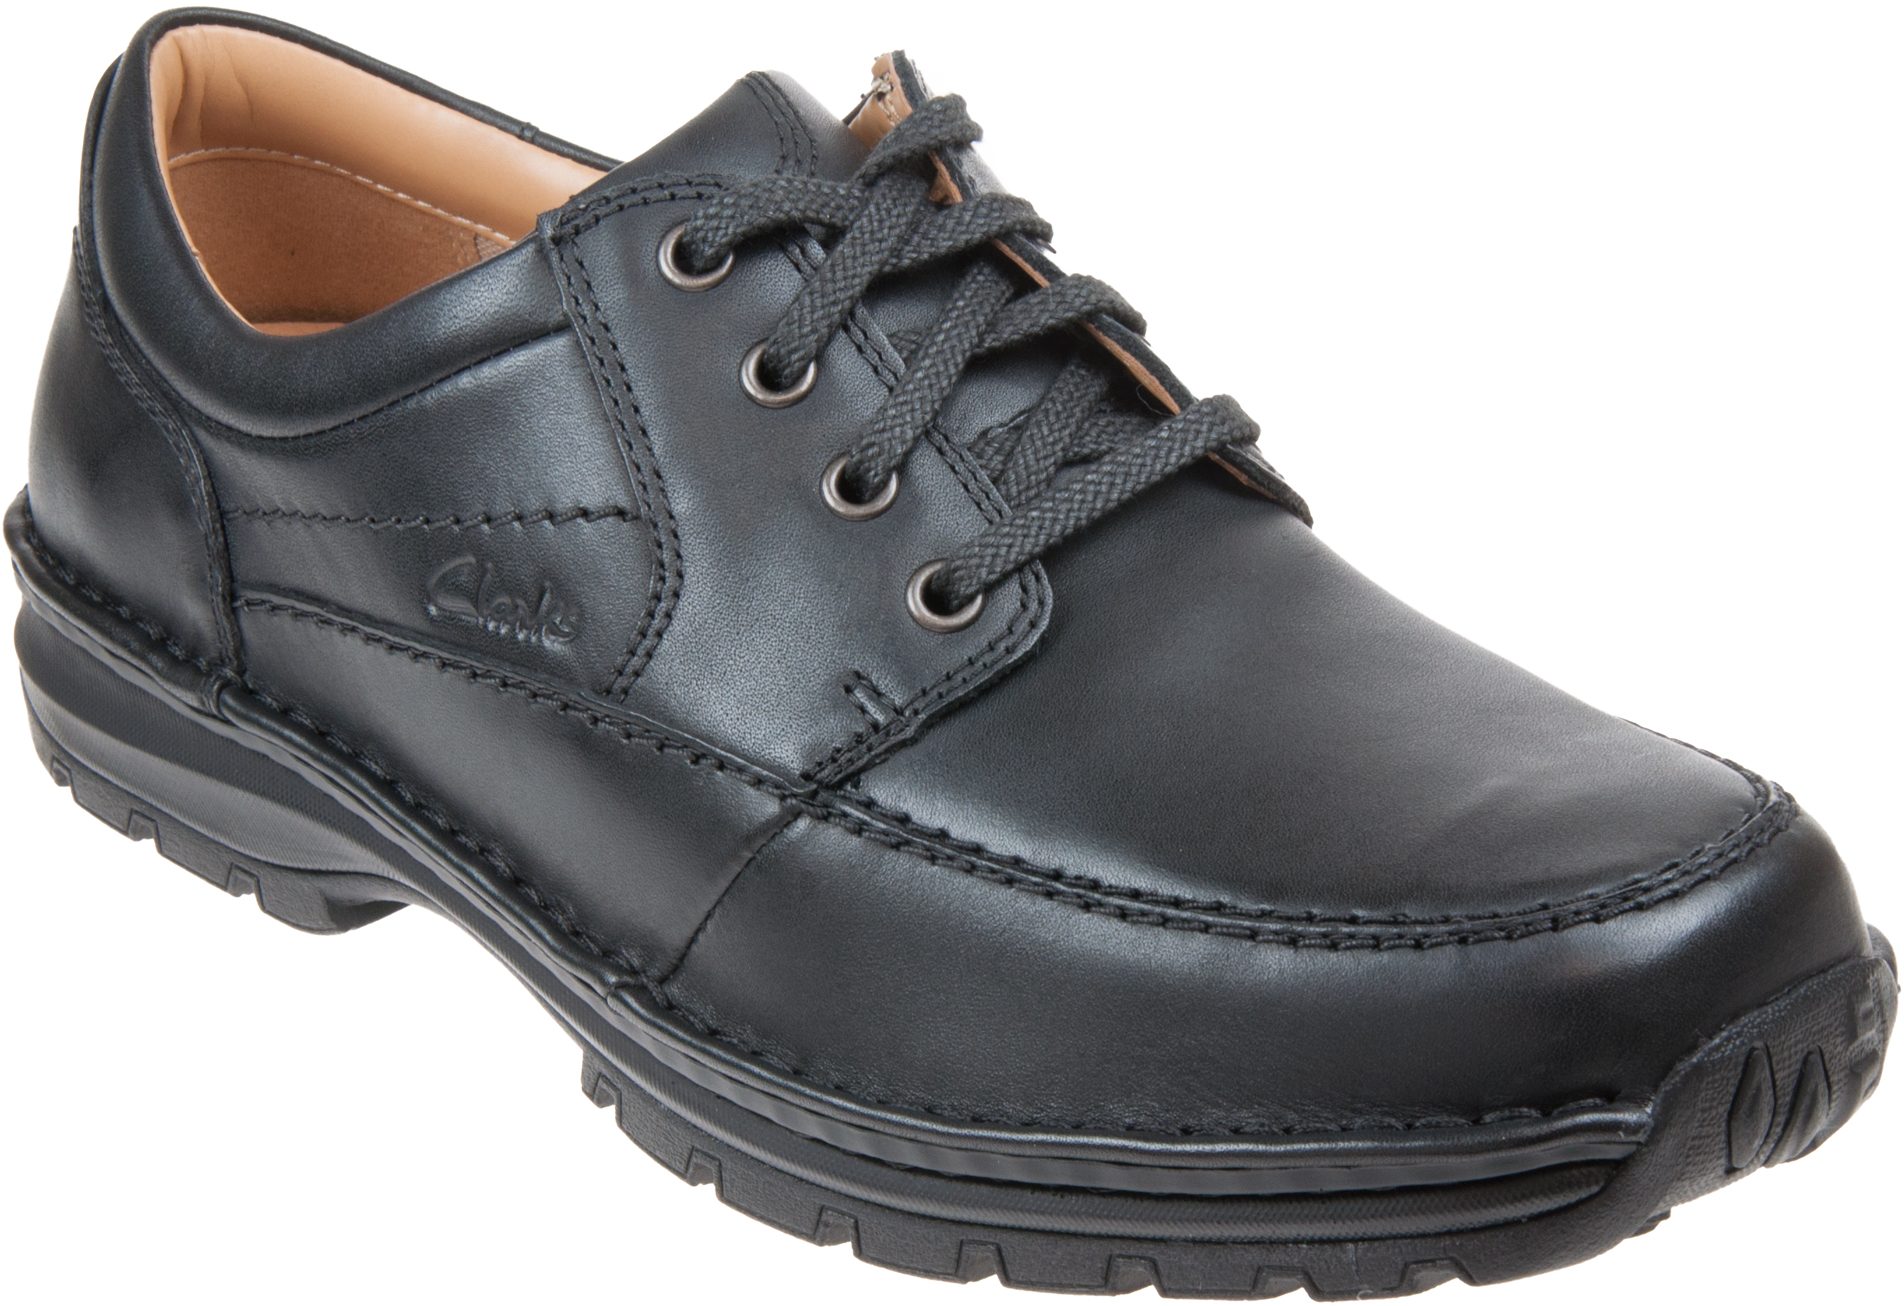 Clarks Sidmouth Mile Black Leather 20356568 - Casual Shoes - Humphries ...